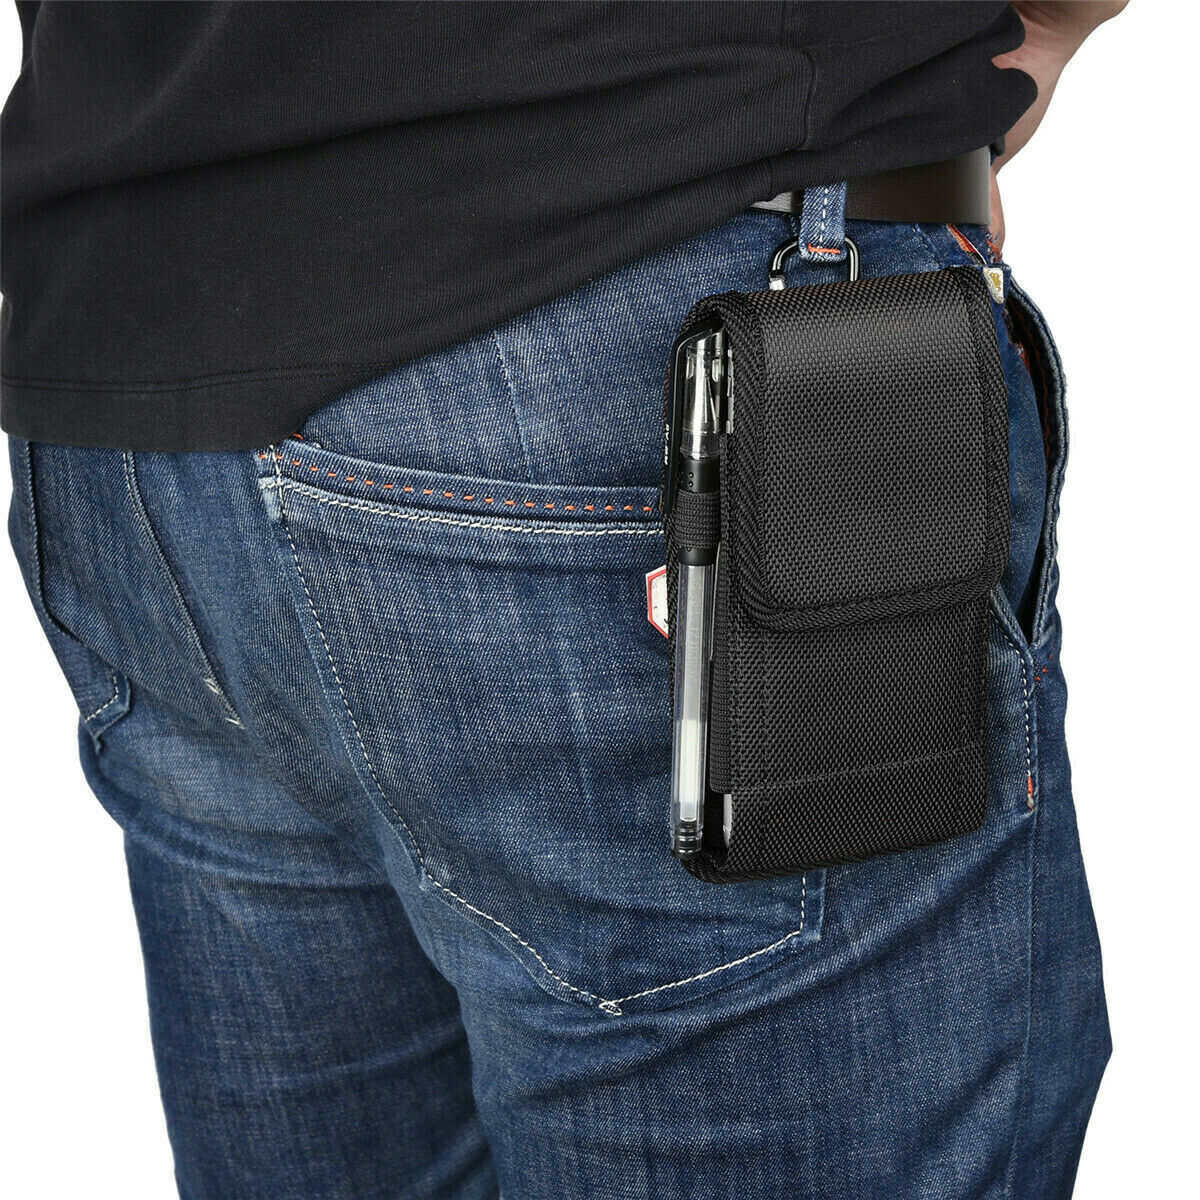 UNIVERSAL Vertical Cell Phone Holster Pouch Belt Case Cover Sleeve Carrying Case